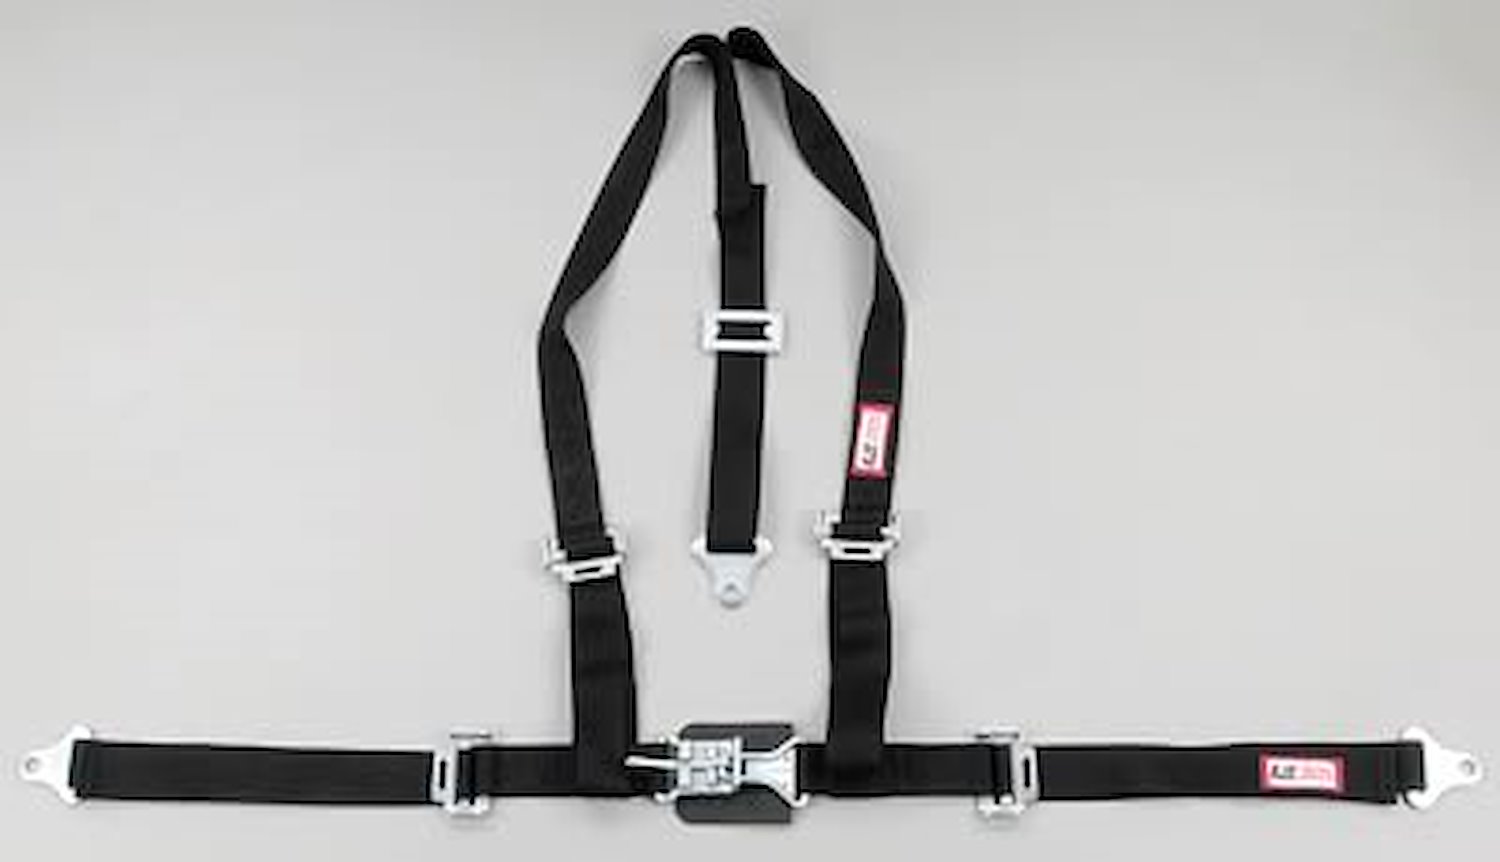 NON-SFI L&L HARNESS 3 PULL UP Lap Belt SEWN IN 2 Shoulder Harness V ROLL BAR Mount w/STERNUM STRAP ALL SNAP ENDS GRAY